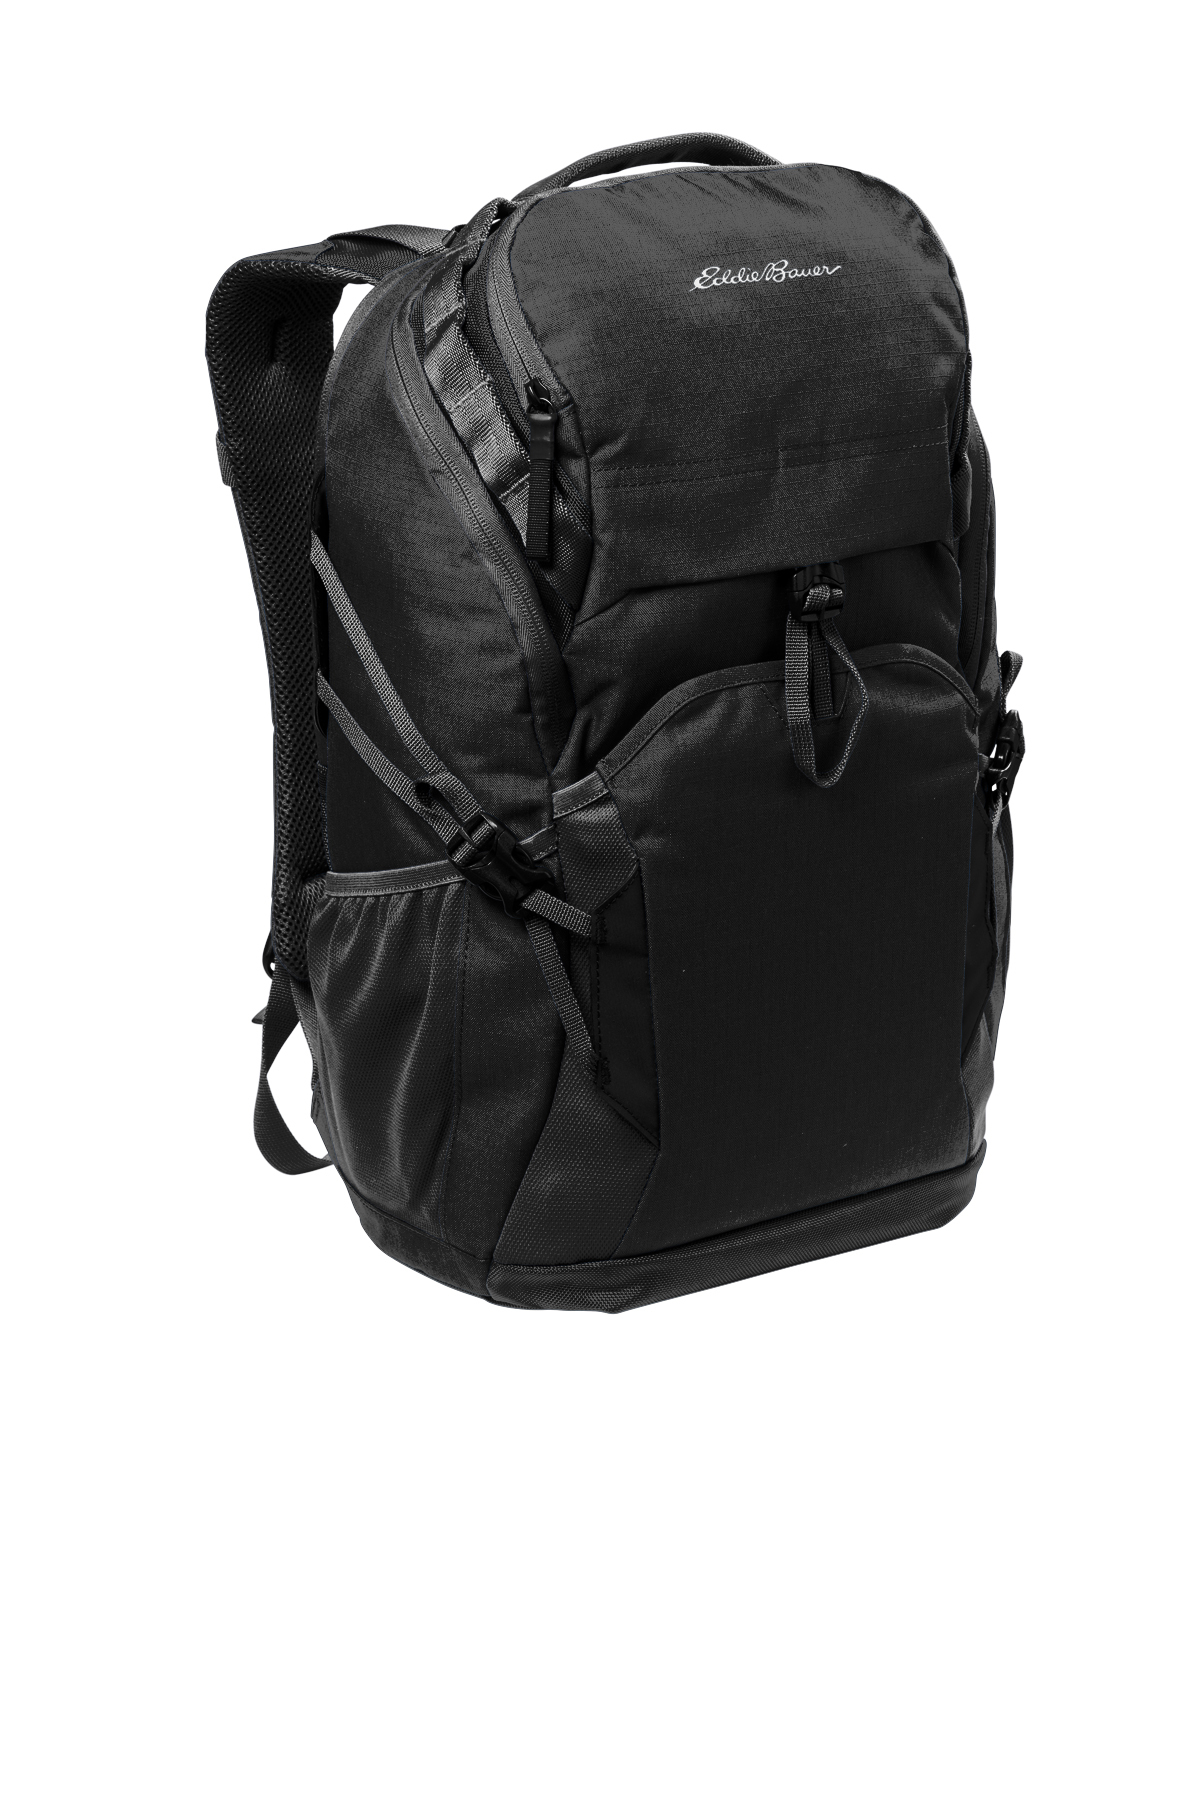 Eddie Bauer Tour Backpack | Product | Company Casuals